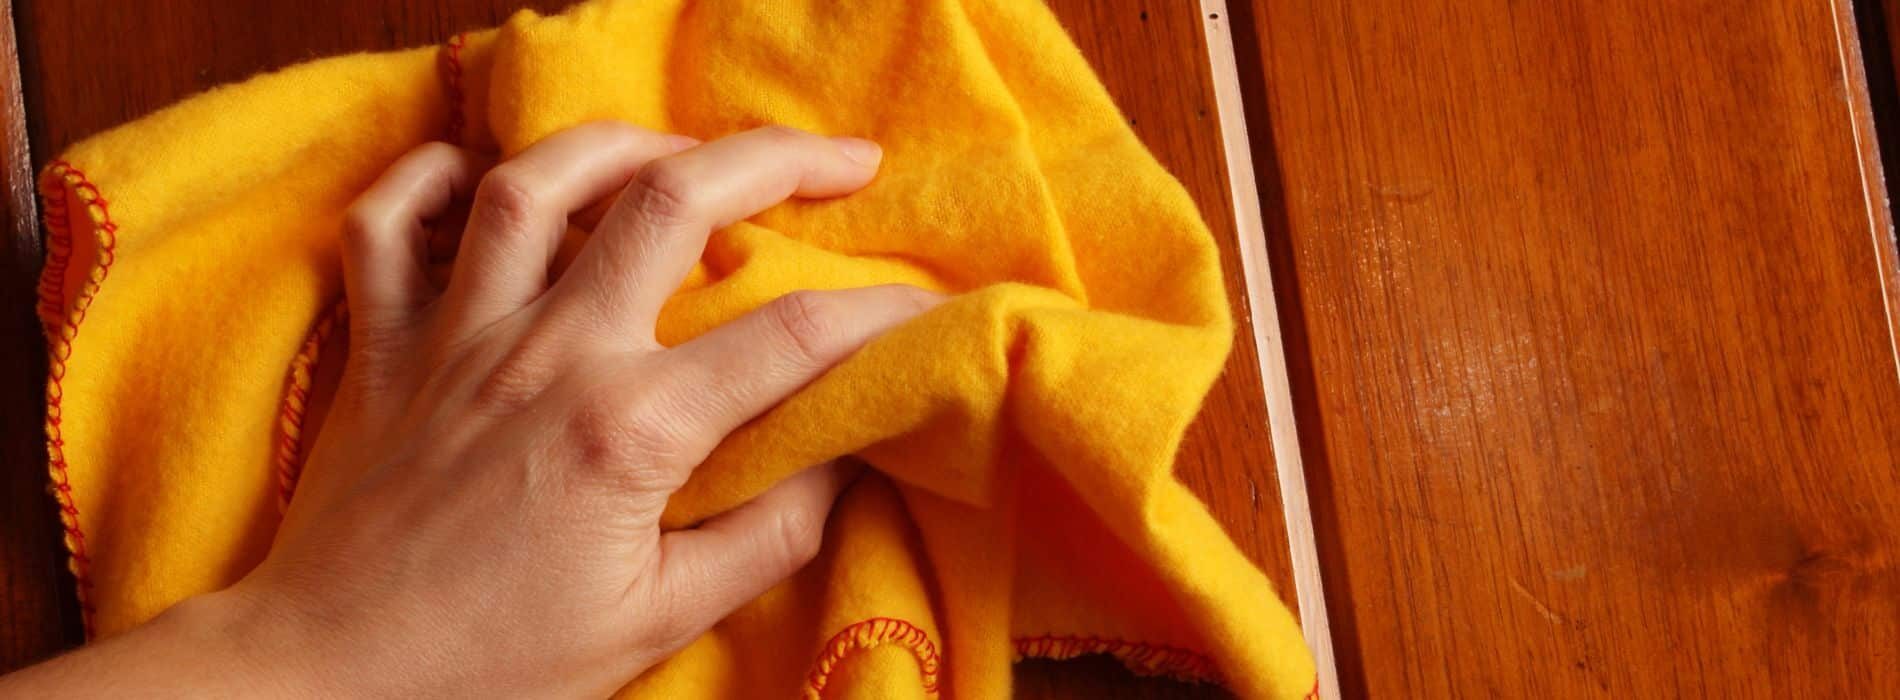 A person's hand is on a yellow towel on the wooden floor.